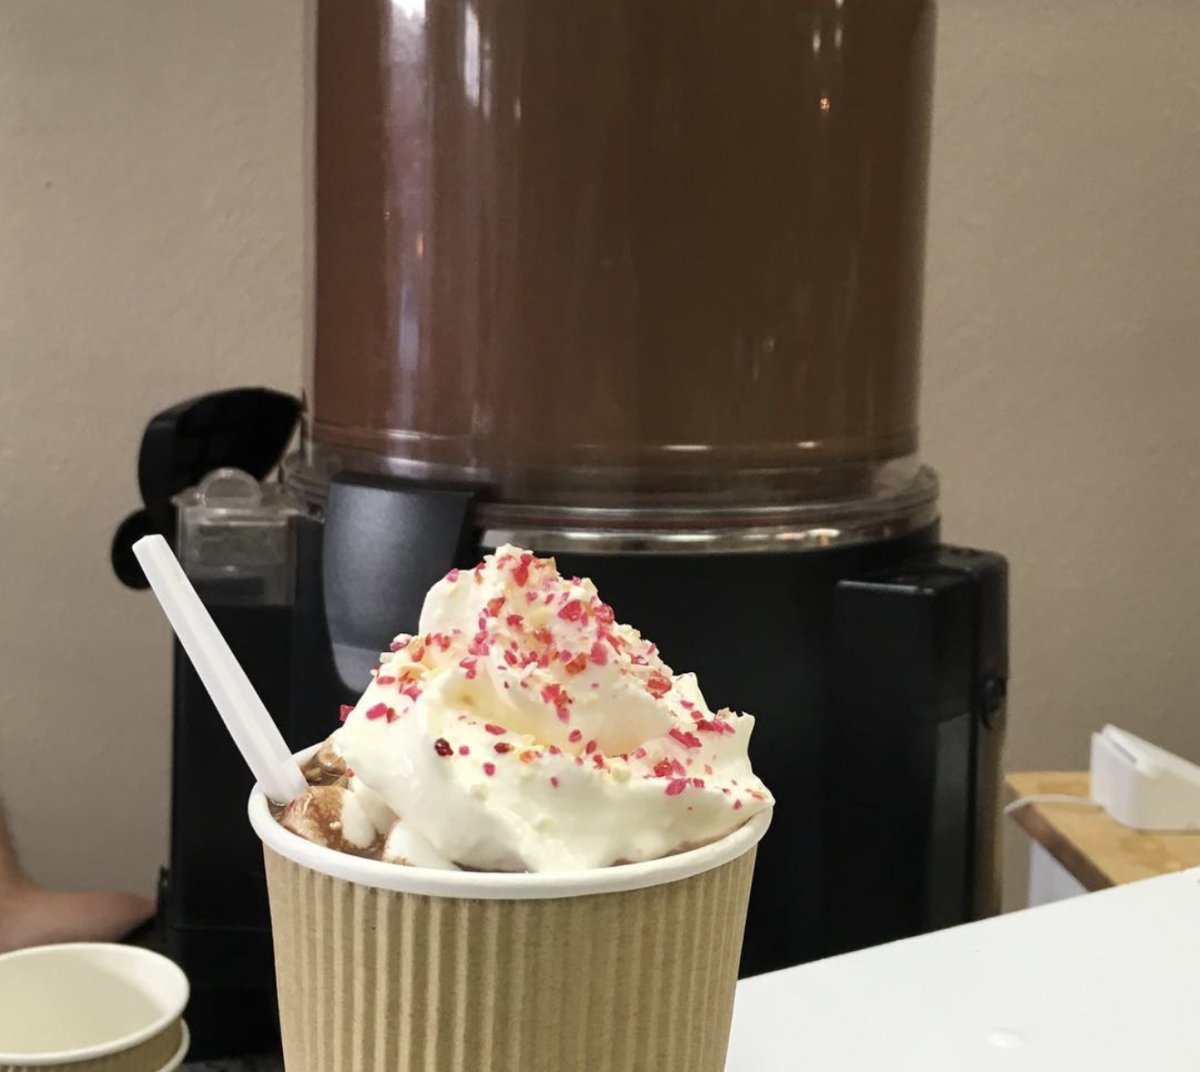 Dr Sue's Hot Chocolate